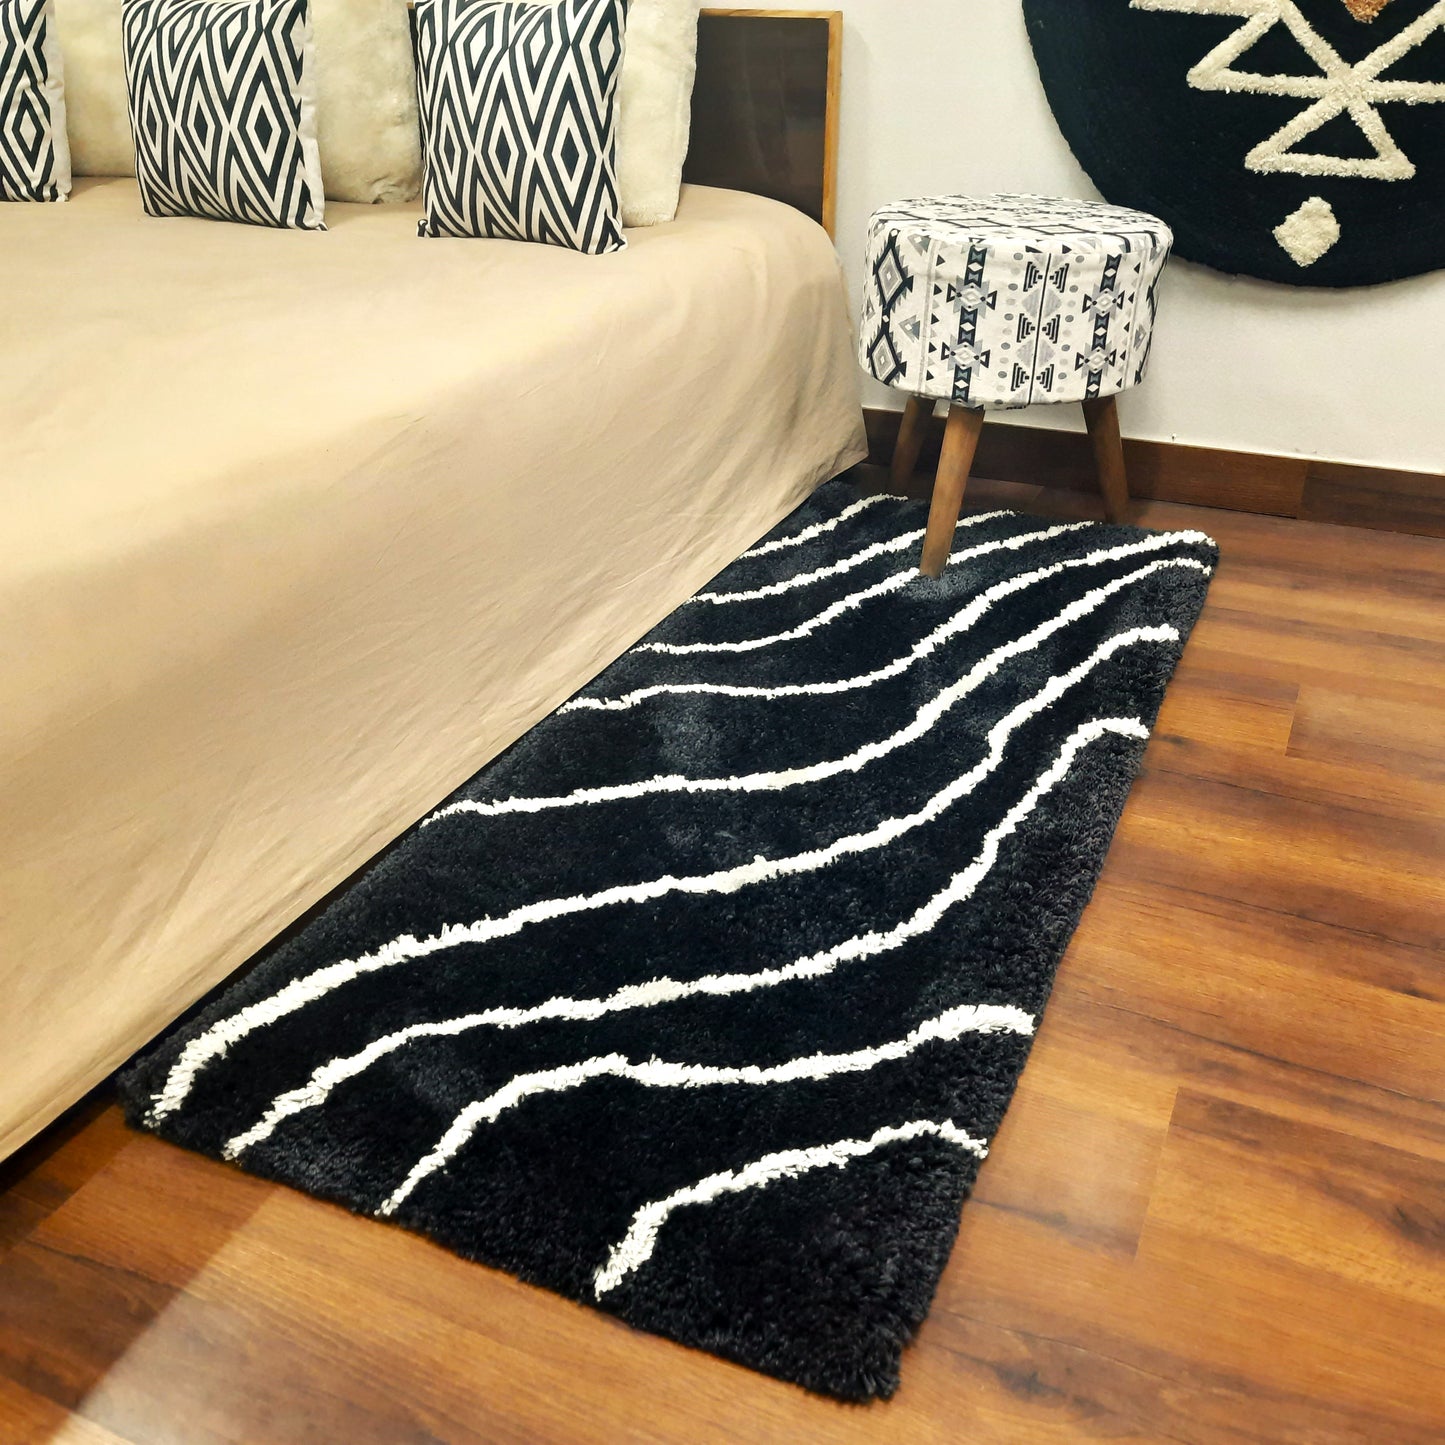 Plush Soft Washable Shaggy Black Carpet With White Wave Design /Bedside Runners by Avioni Home